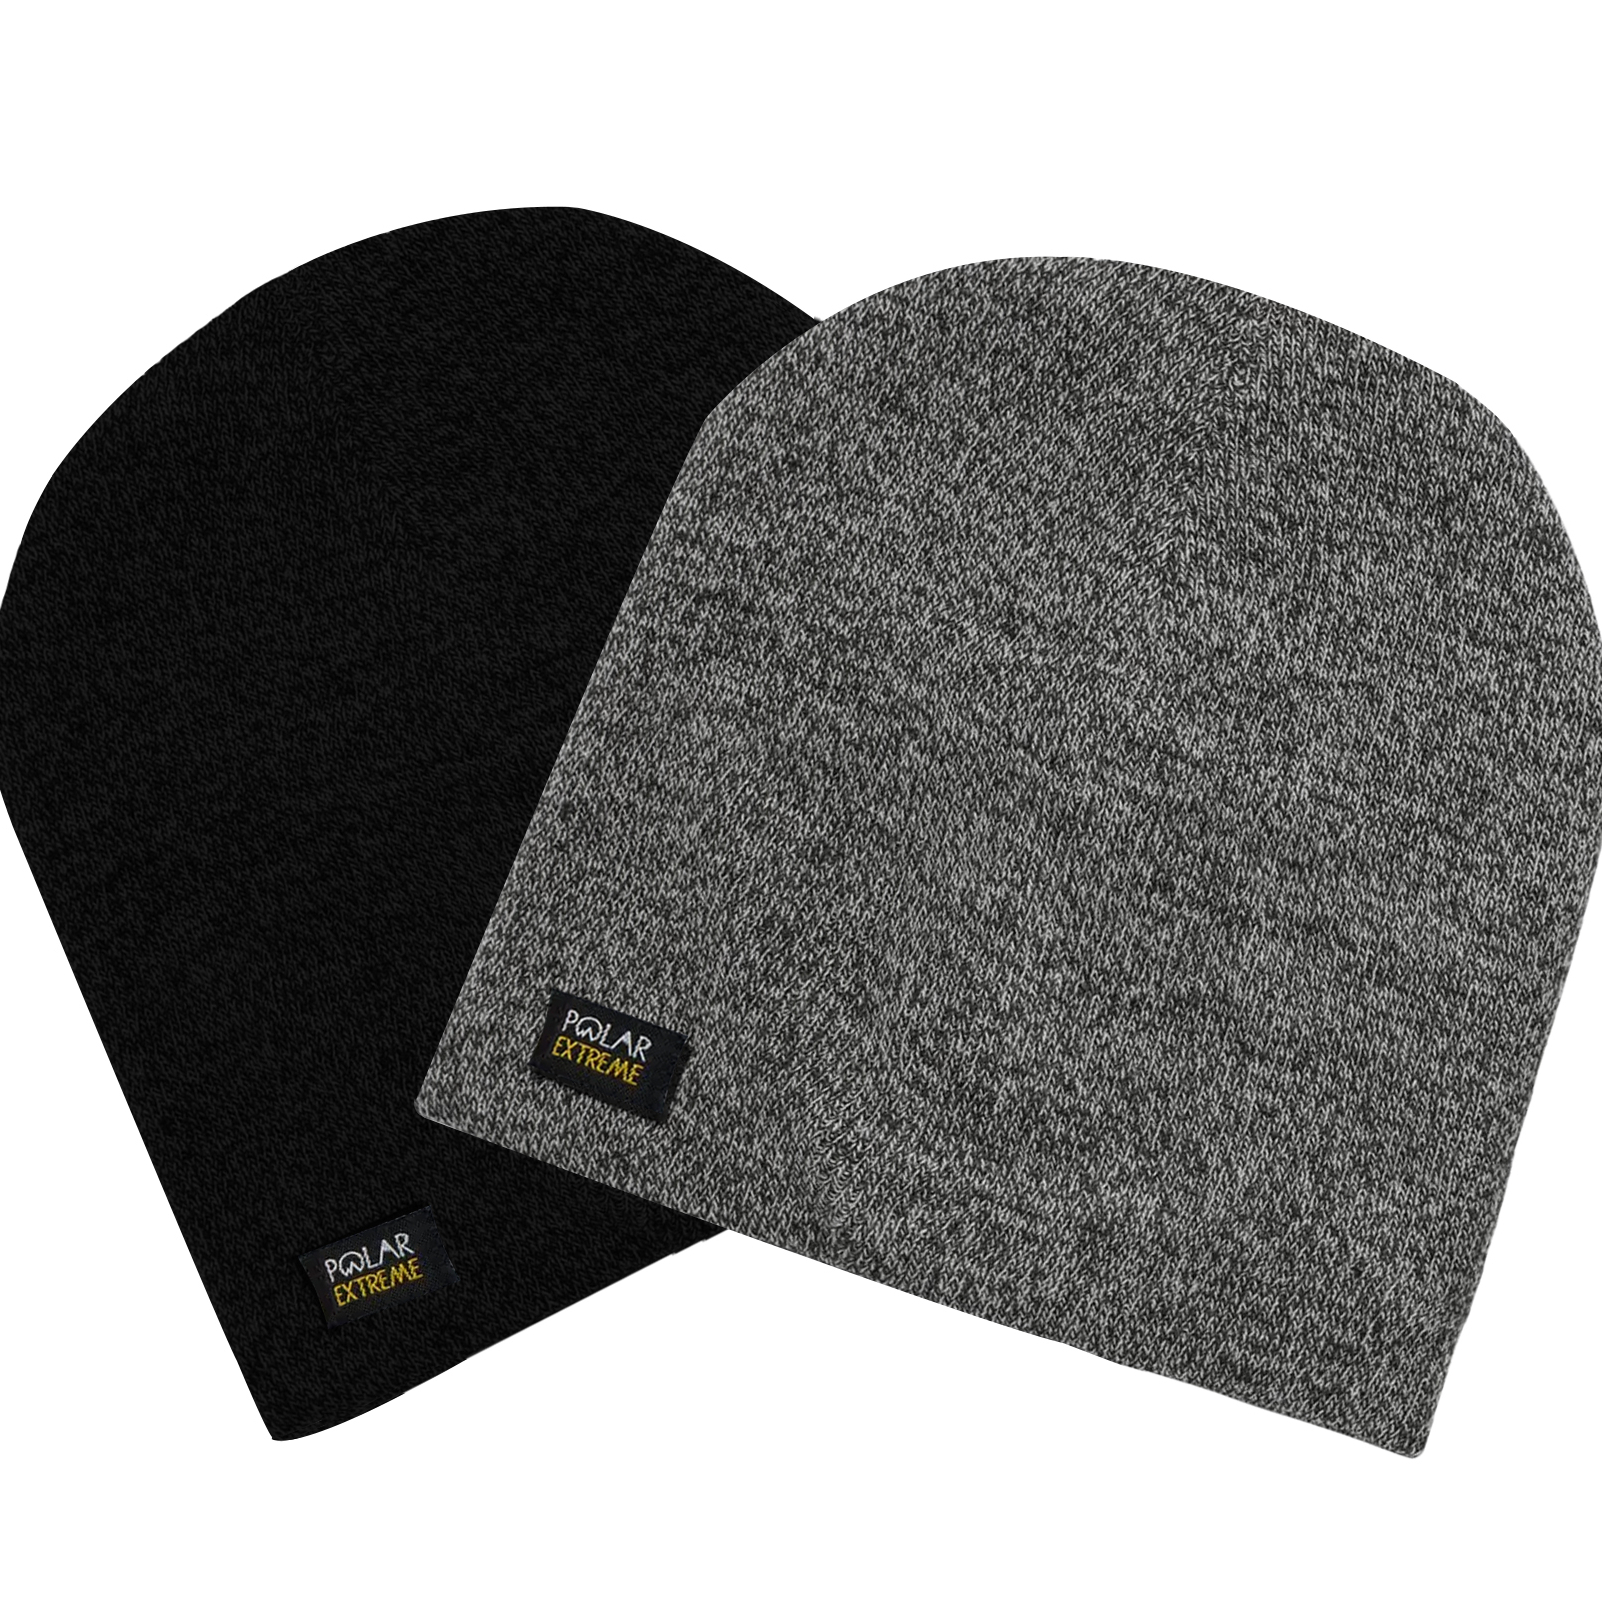 2-Pack: Men's Warm Insulated Knitted Pull Beanie Winter Thermal Hat